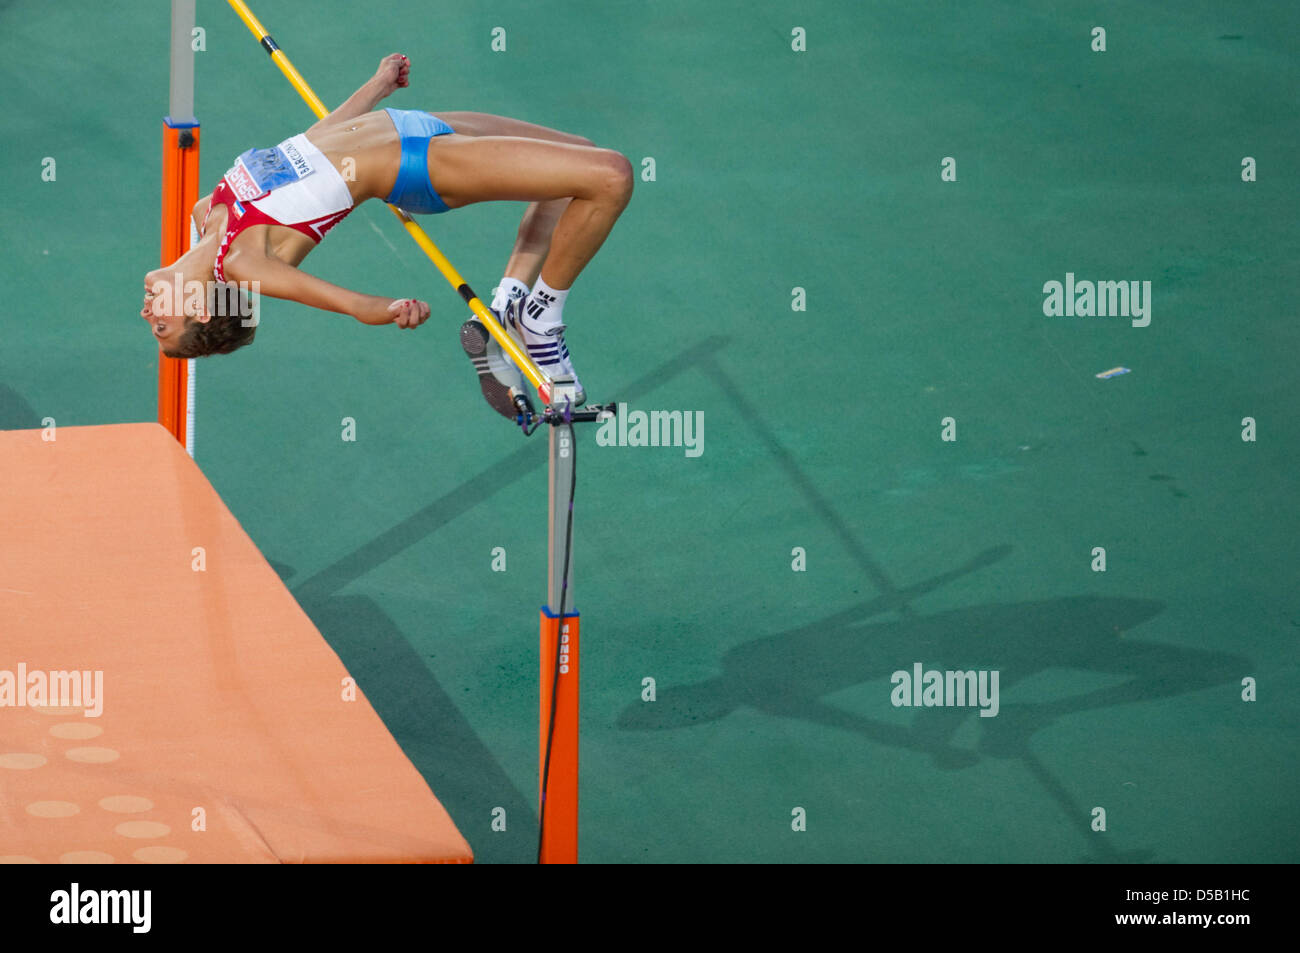 Croatian high jumper Blanka Vlasic clears the bar in the women's high jump competition at the European Athletics Championships in Barcelona, Spain, 01 August 2010. Vlasic won the gold medal. Photo: Bernd Thissen; Stock Photo